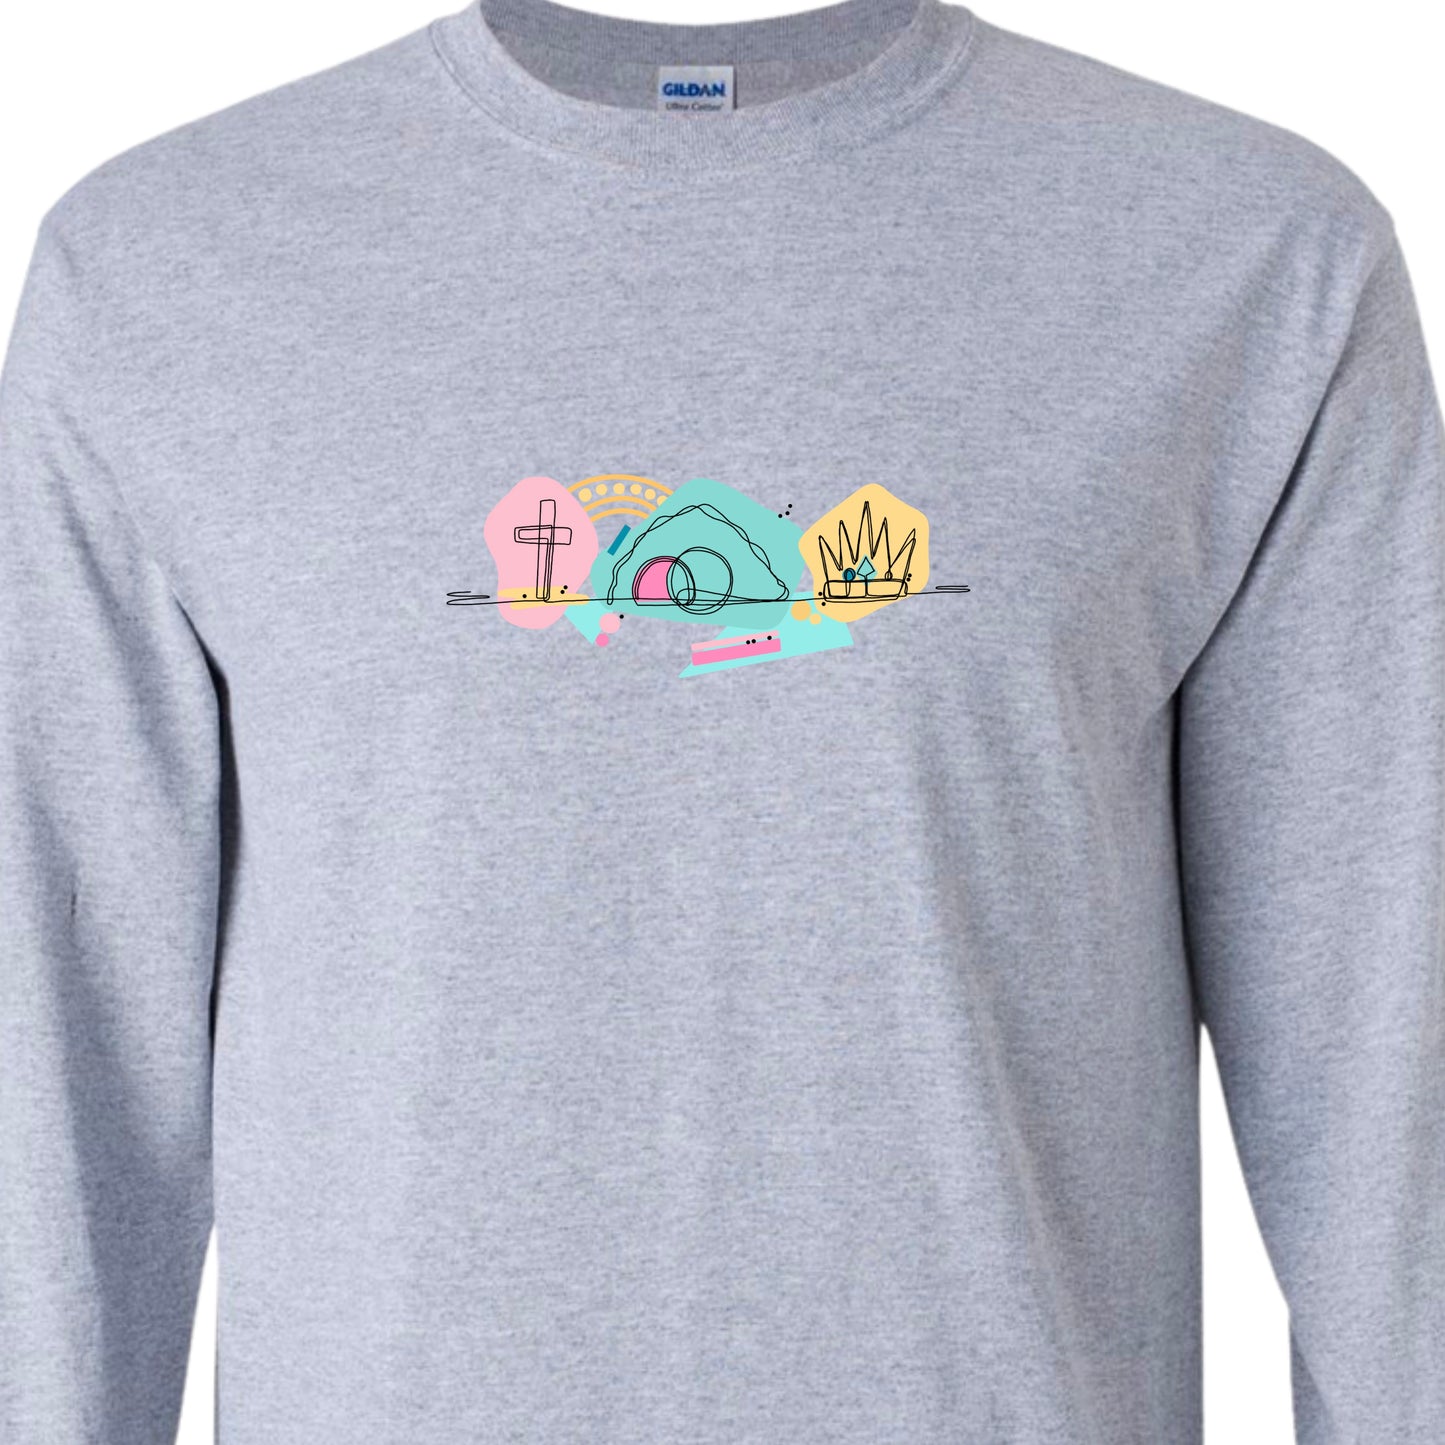 Gray adult long sleeved tshirt featureing the East Weekend graphic. 